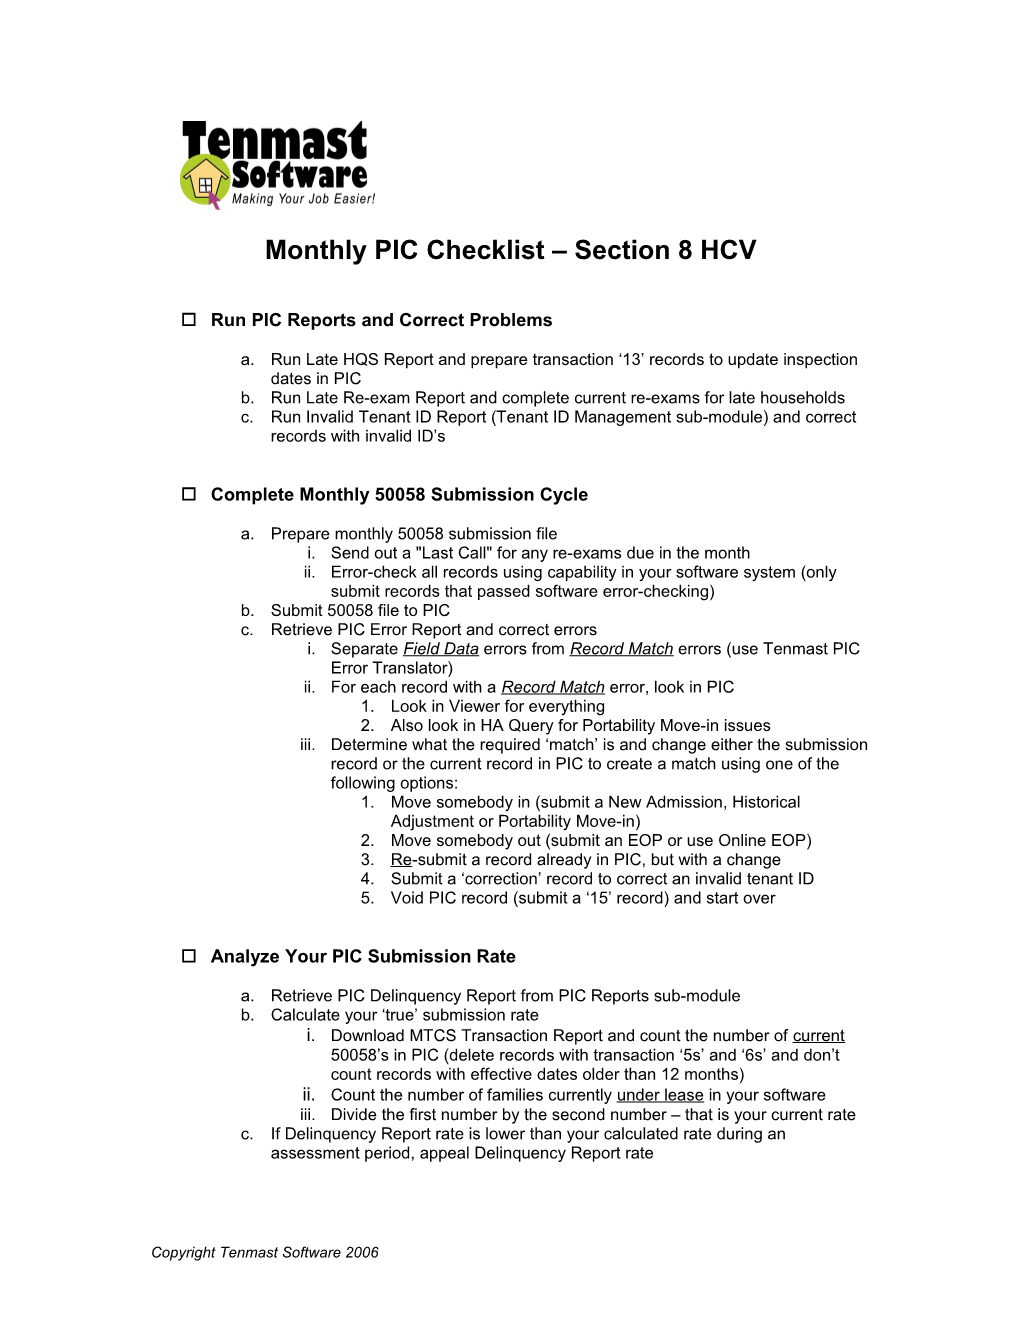 Monthly PIC Checklist Section 8 HCV